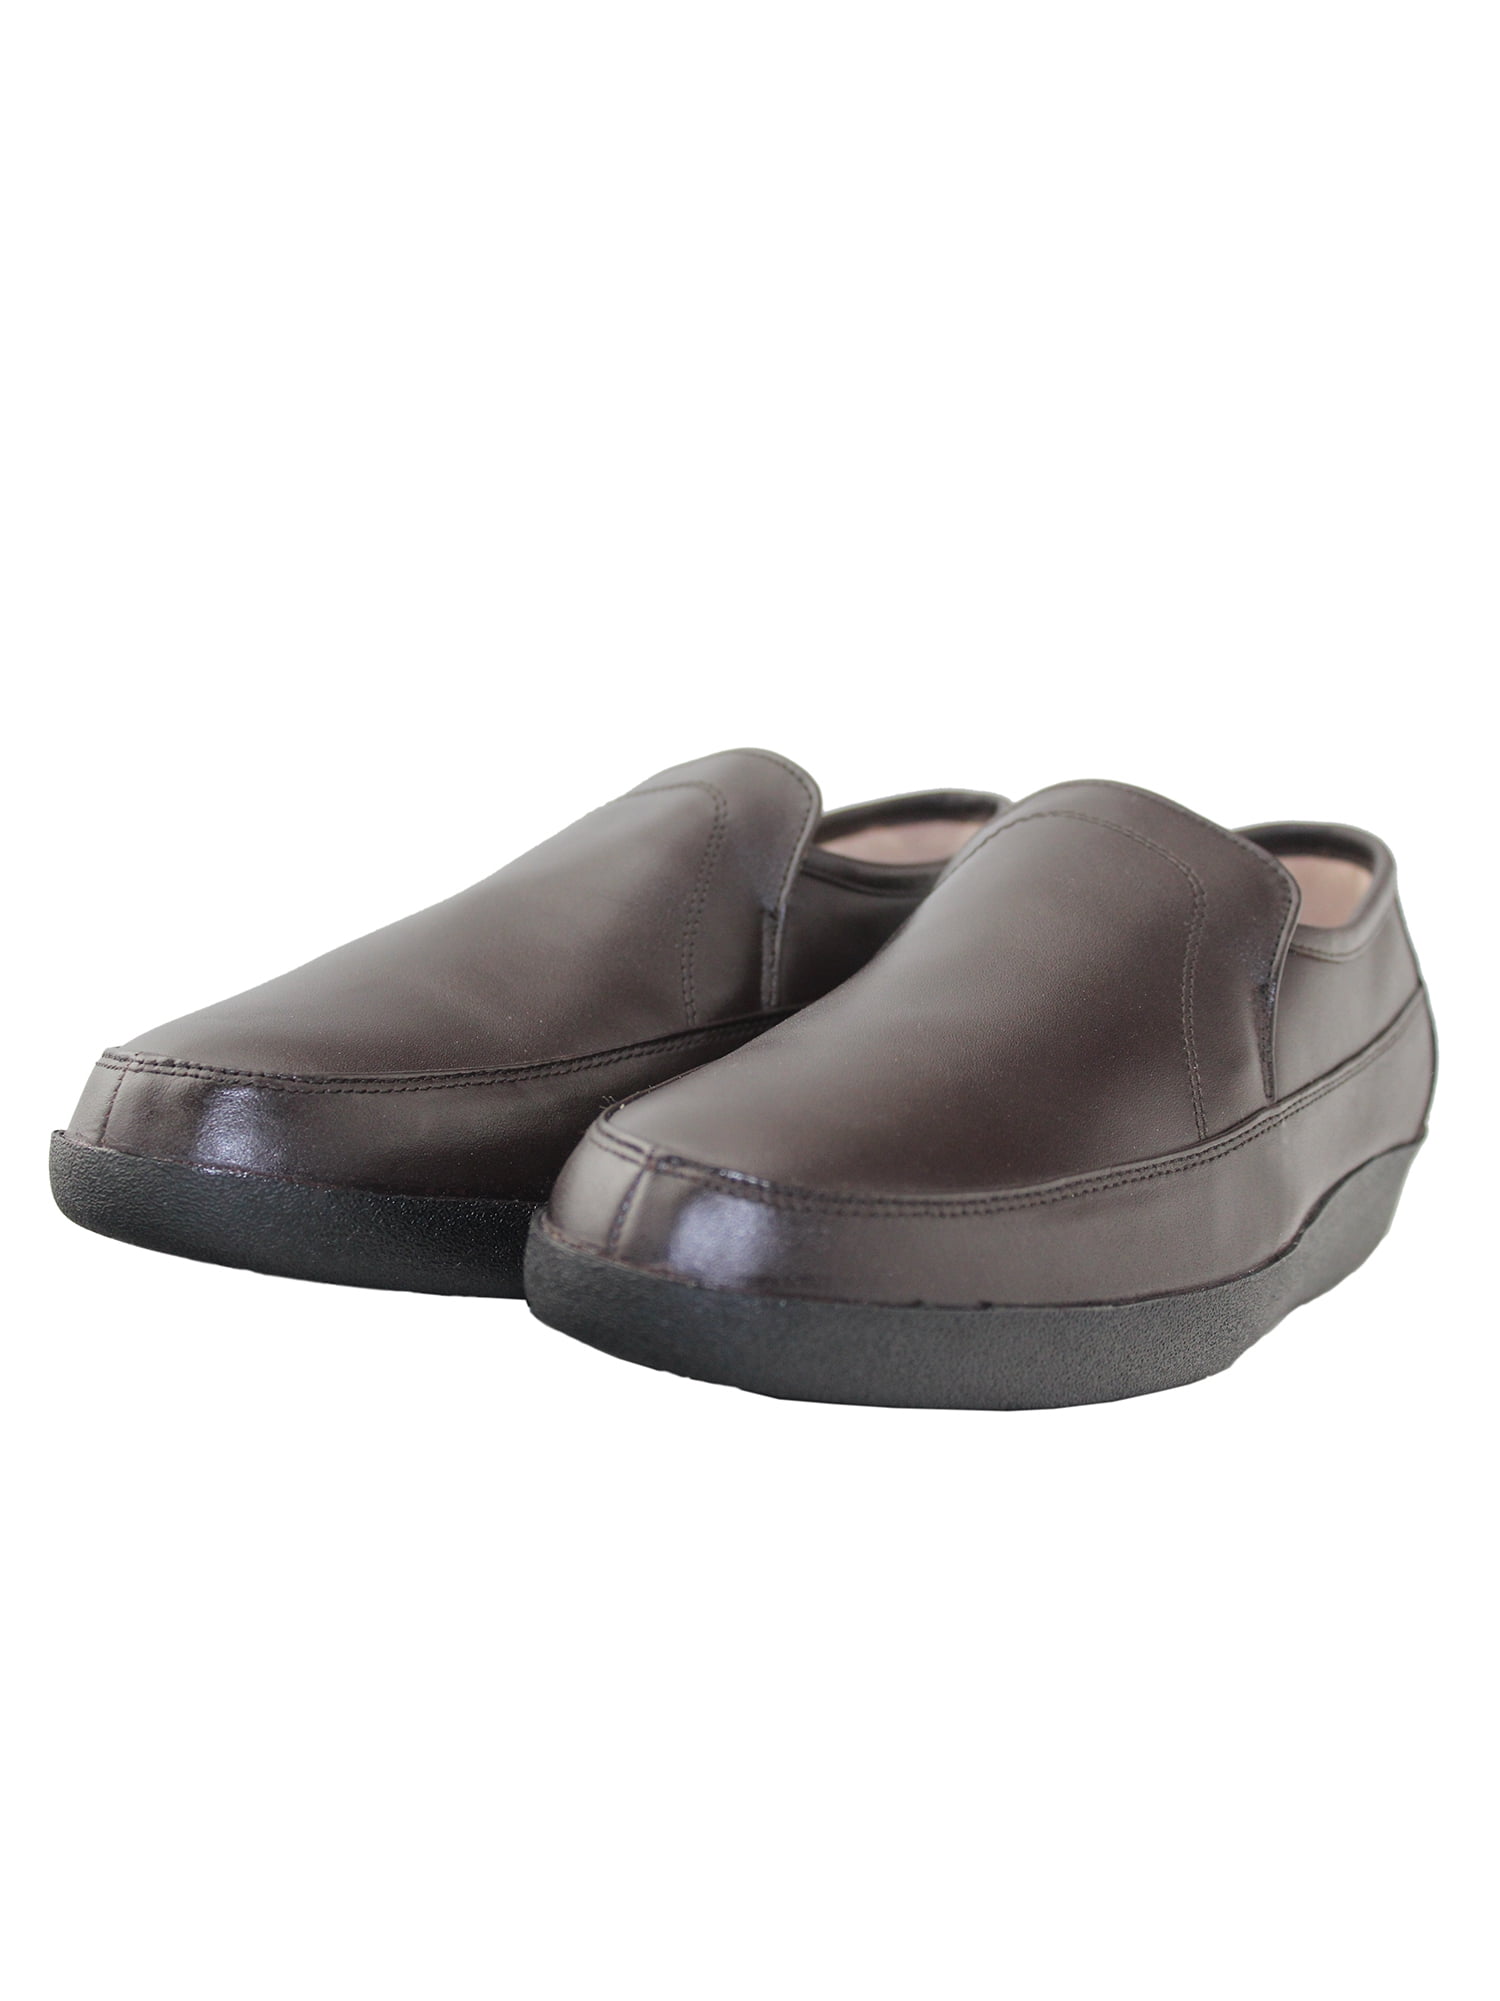 mens casual slip on shoes wide width